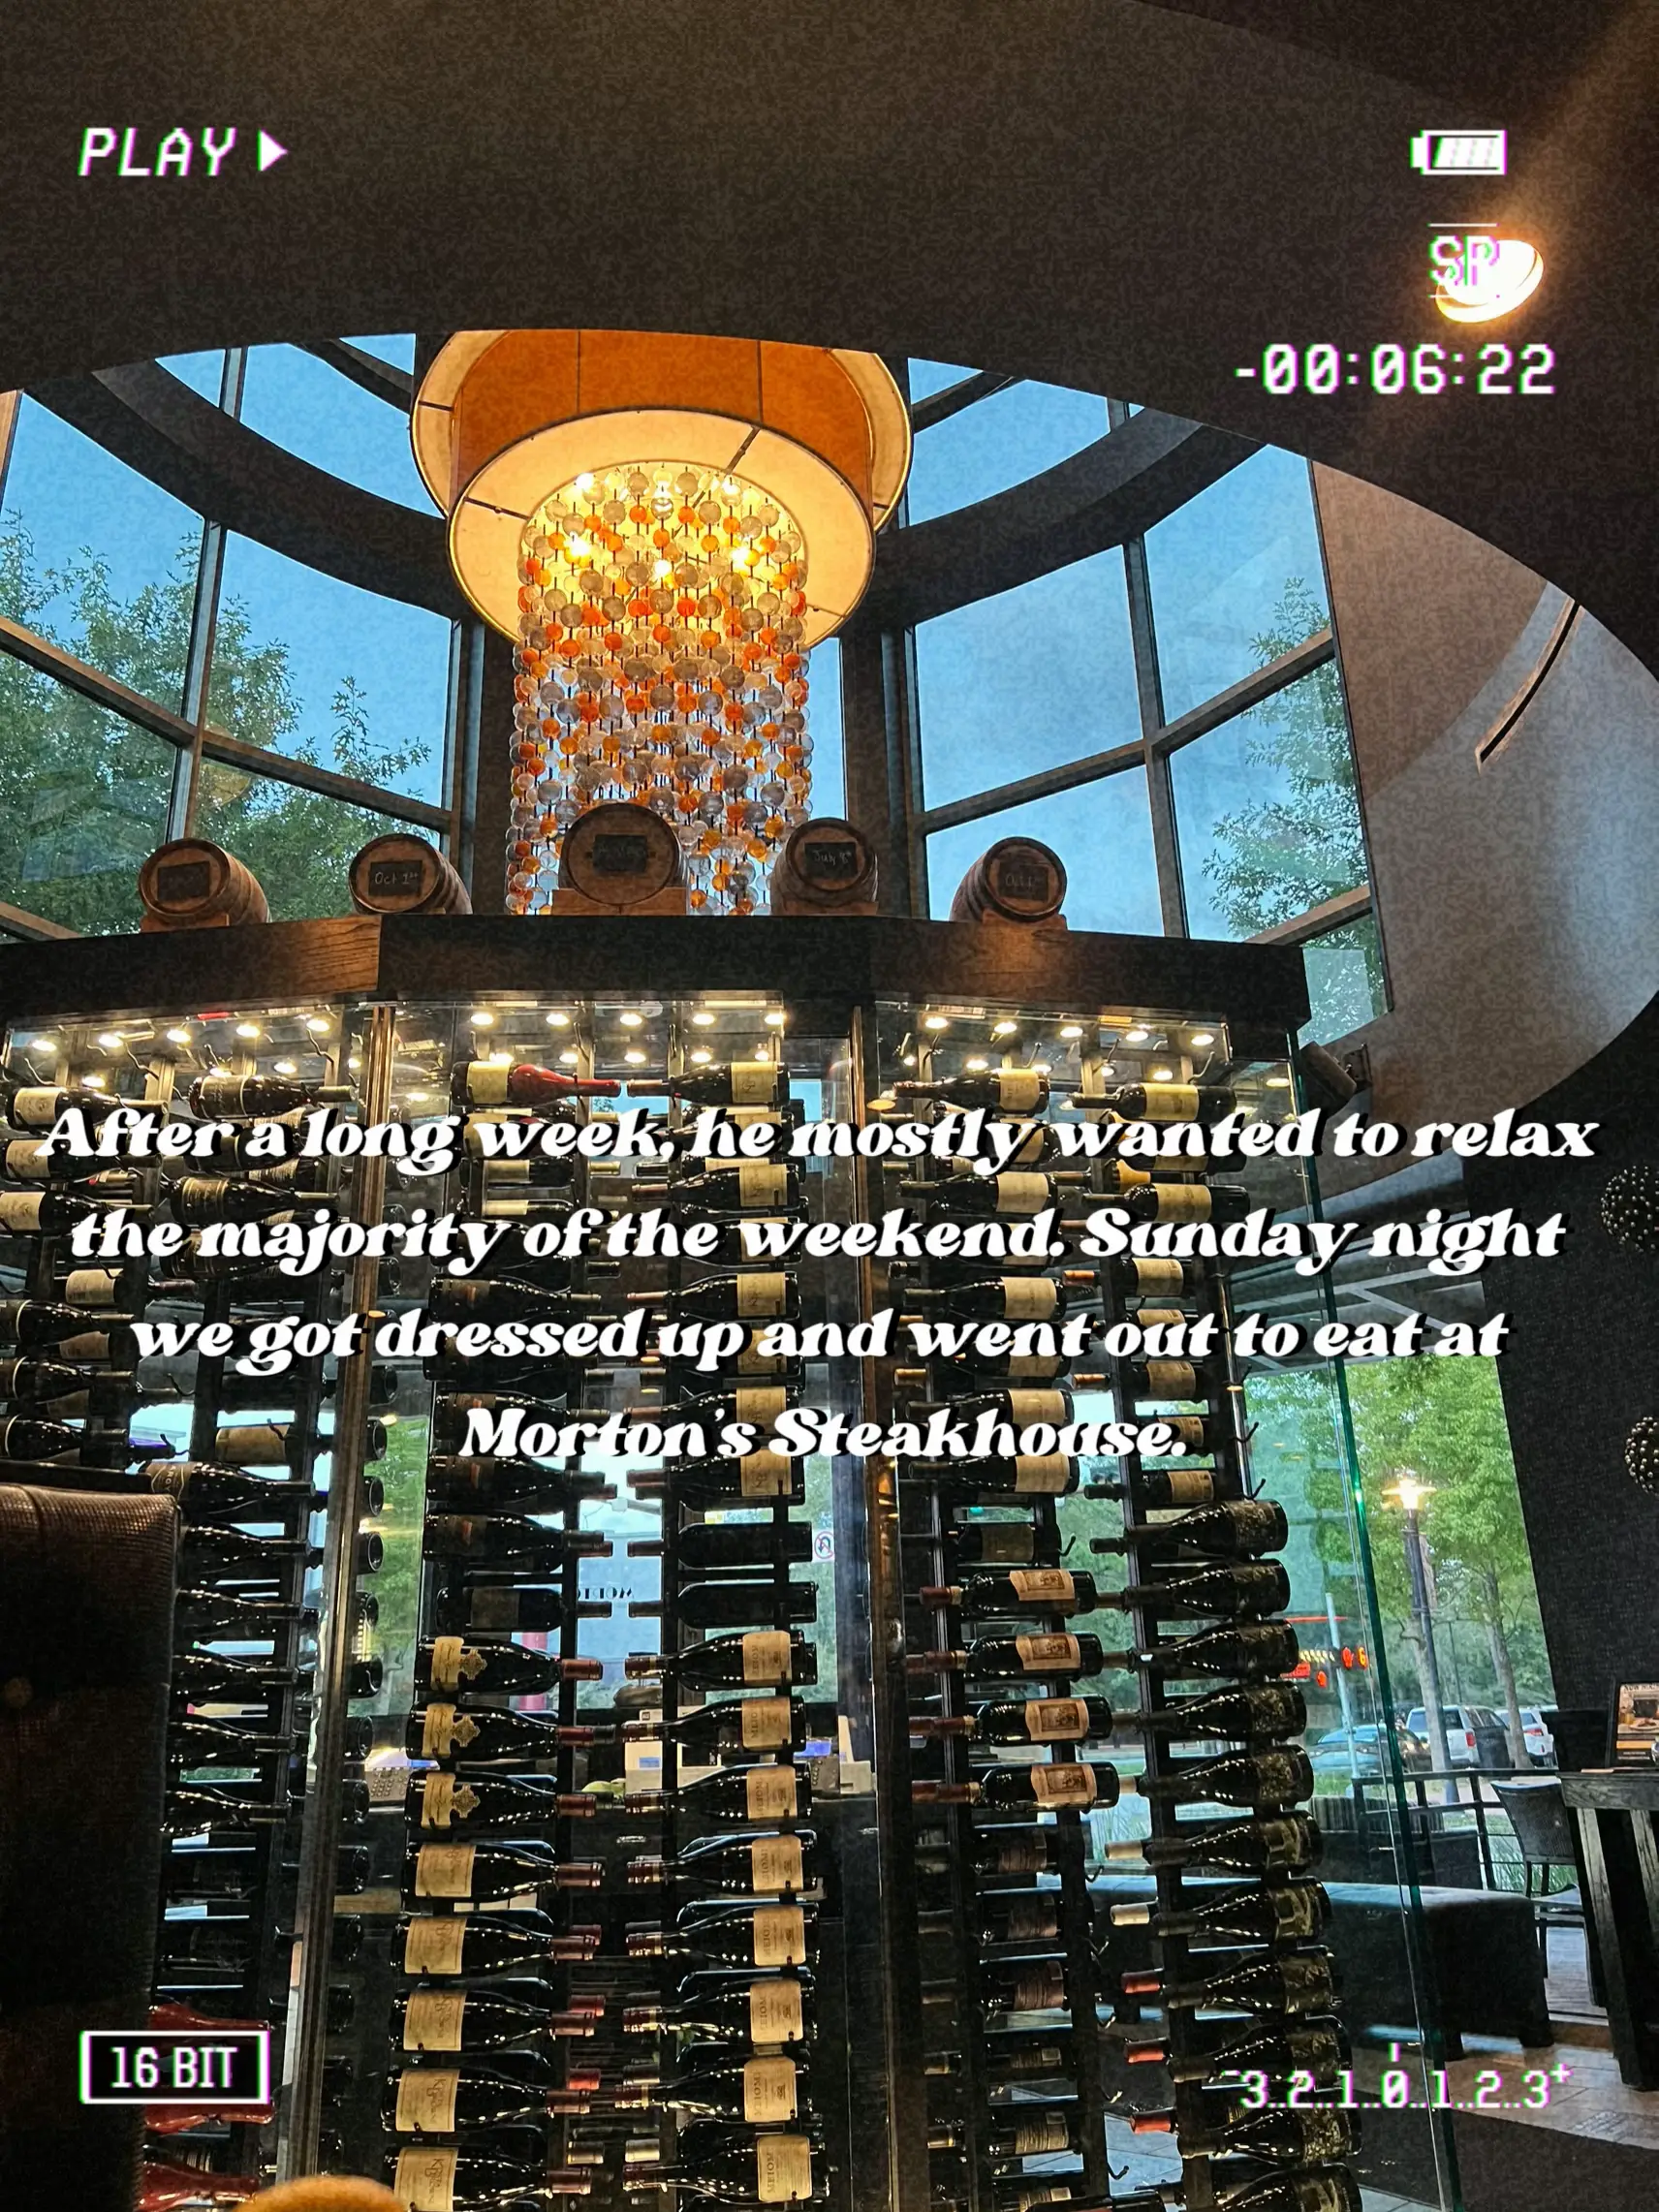  A restaurant with a large number of bottles of wine and a sign that says "after a long week...".